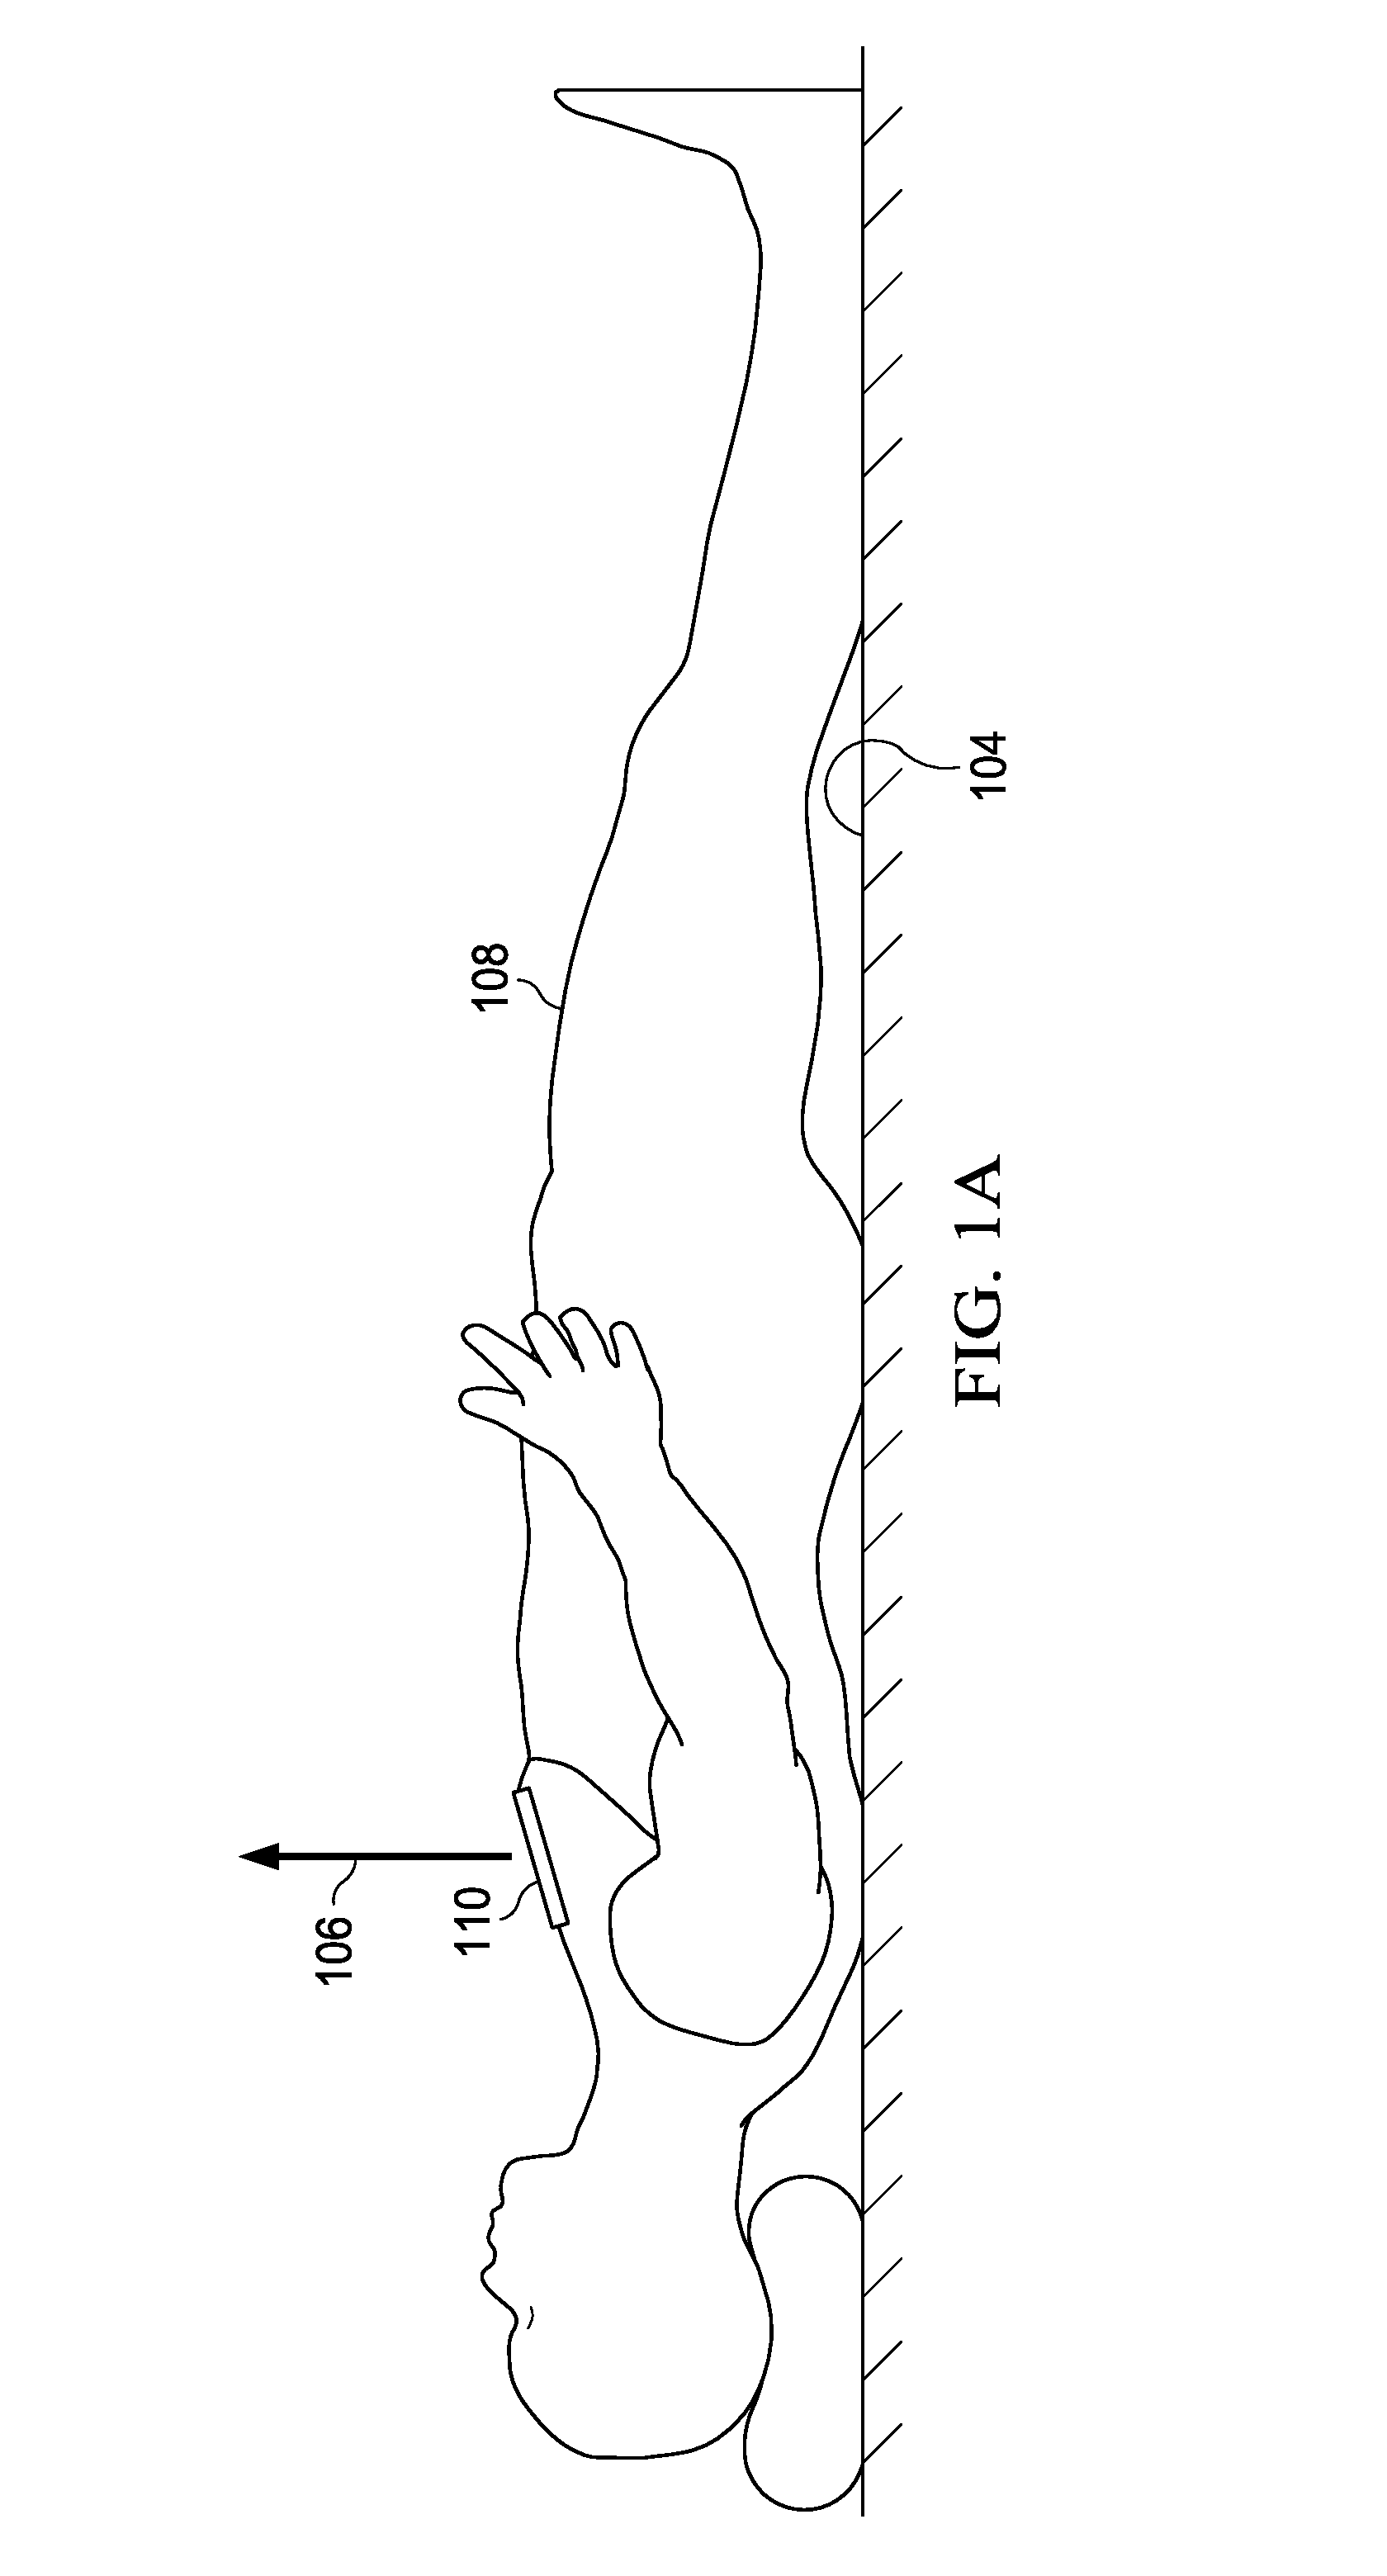 Motion-based seizure detection systems and methods